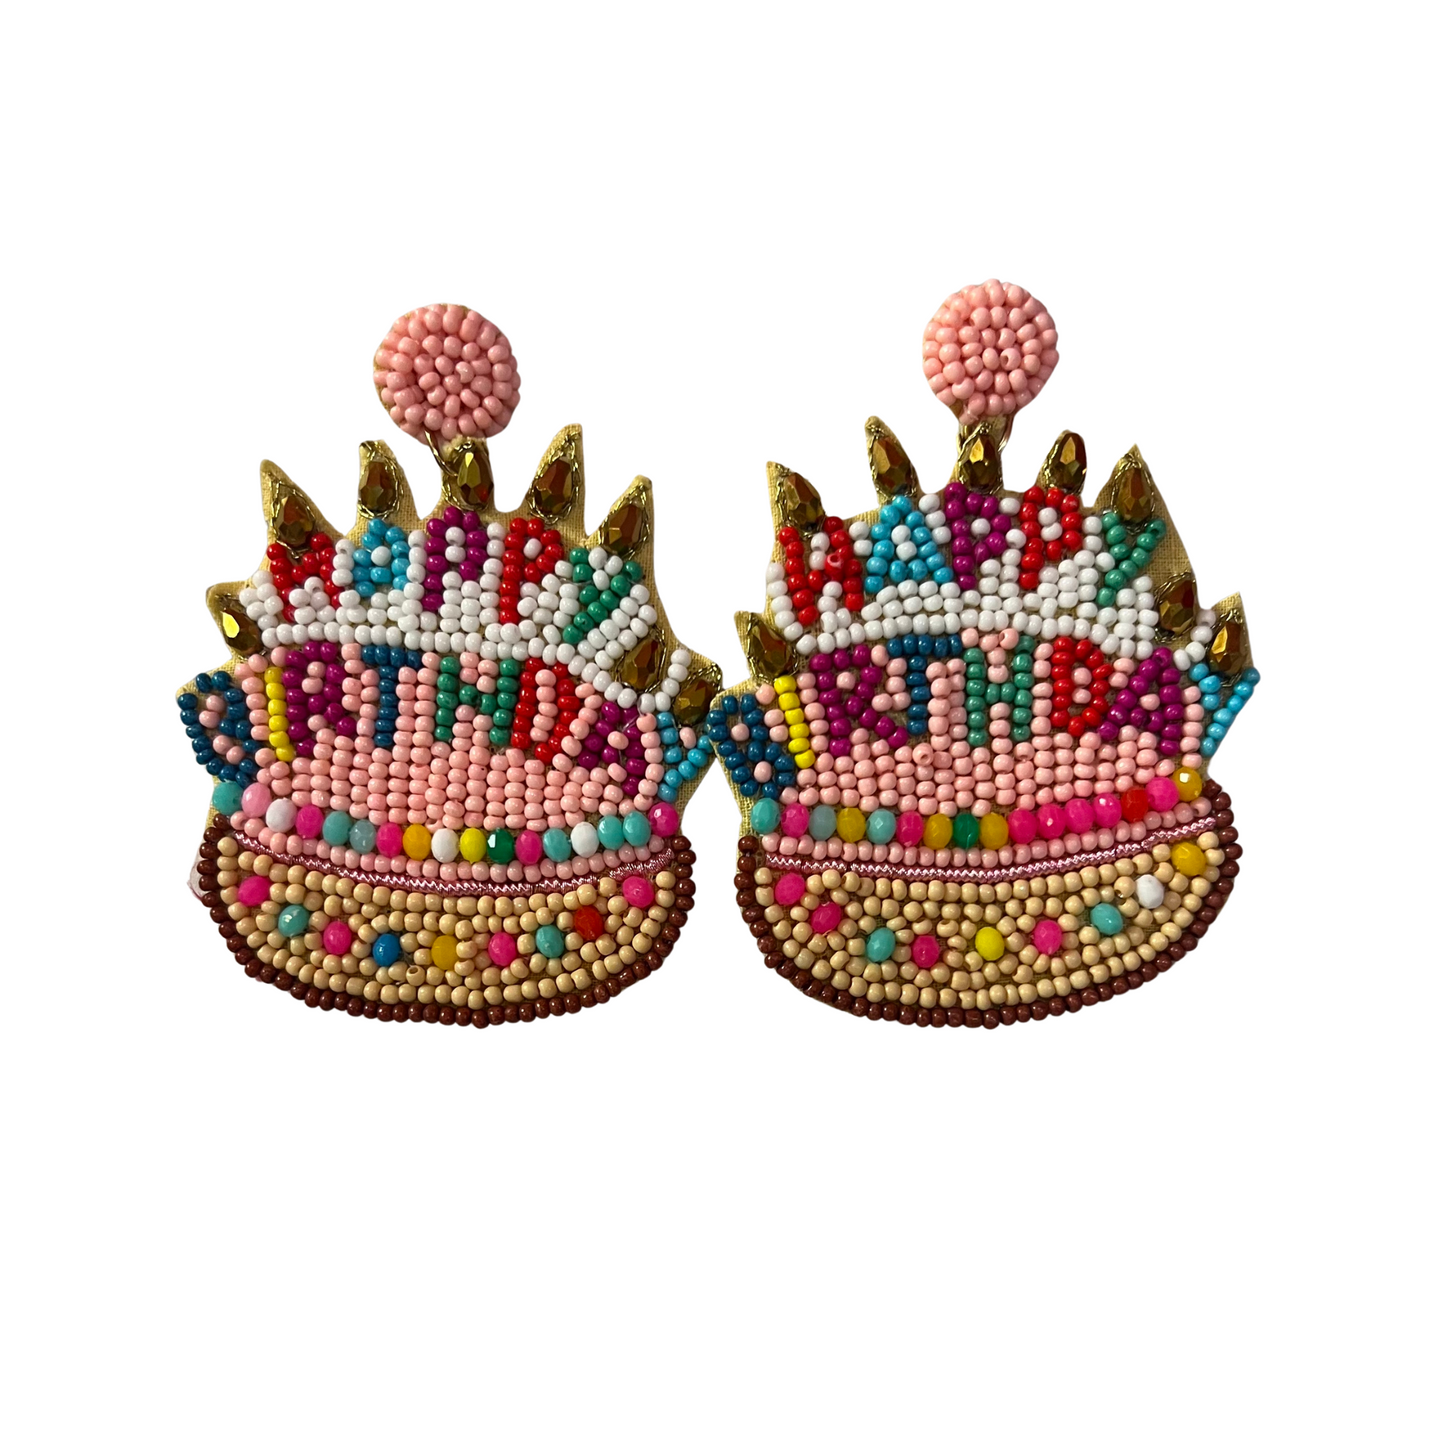 These Happy Birthday dangle earrings feature fun beaded accents perfect for any special occasion. Bring out your festive side with this eye-catching jewelry!